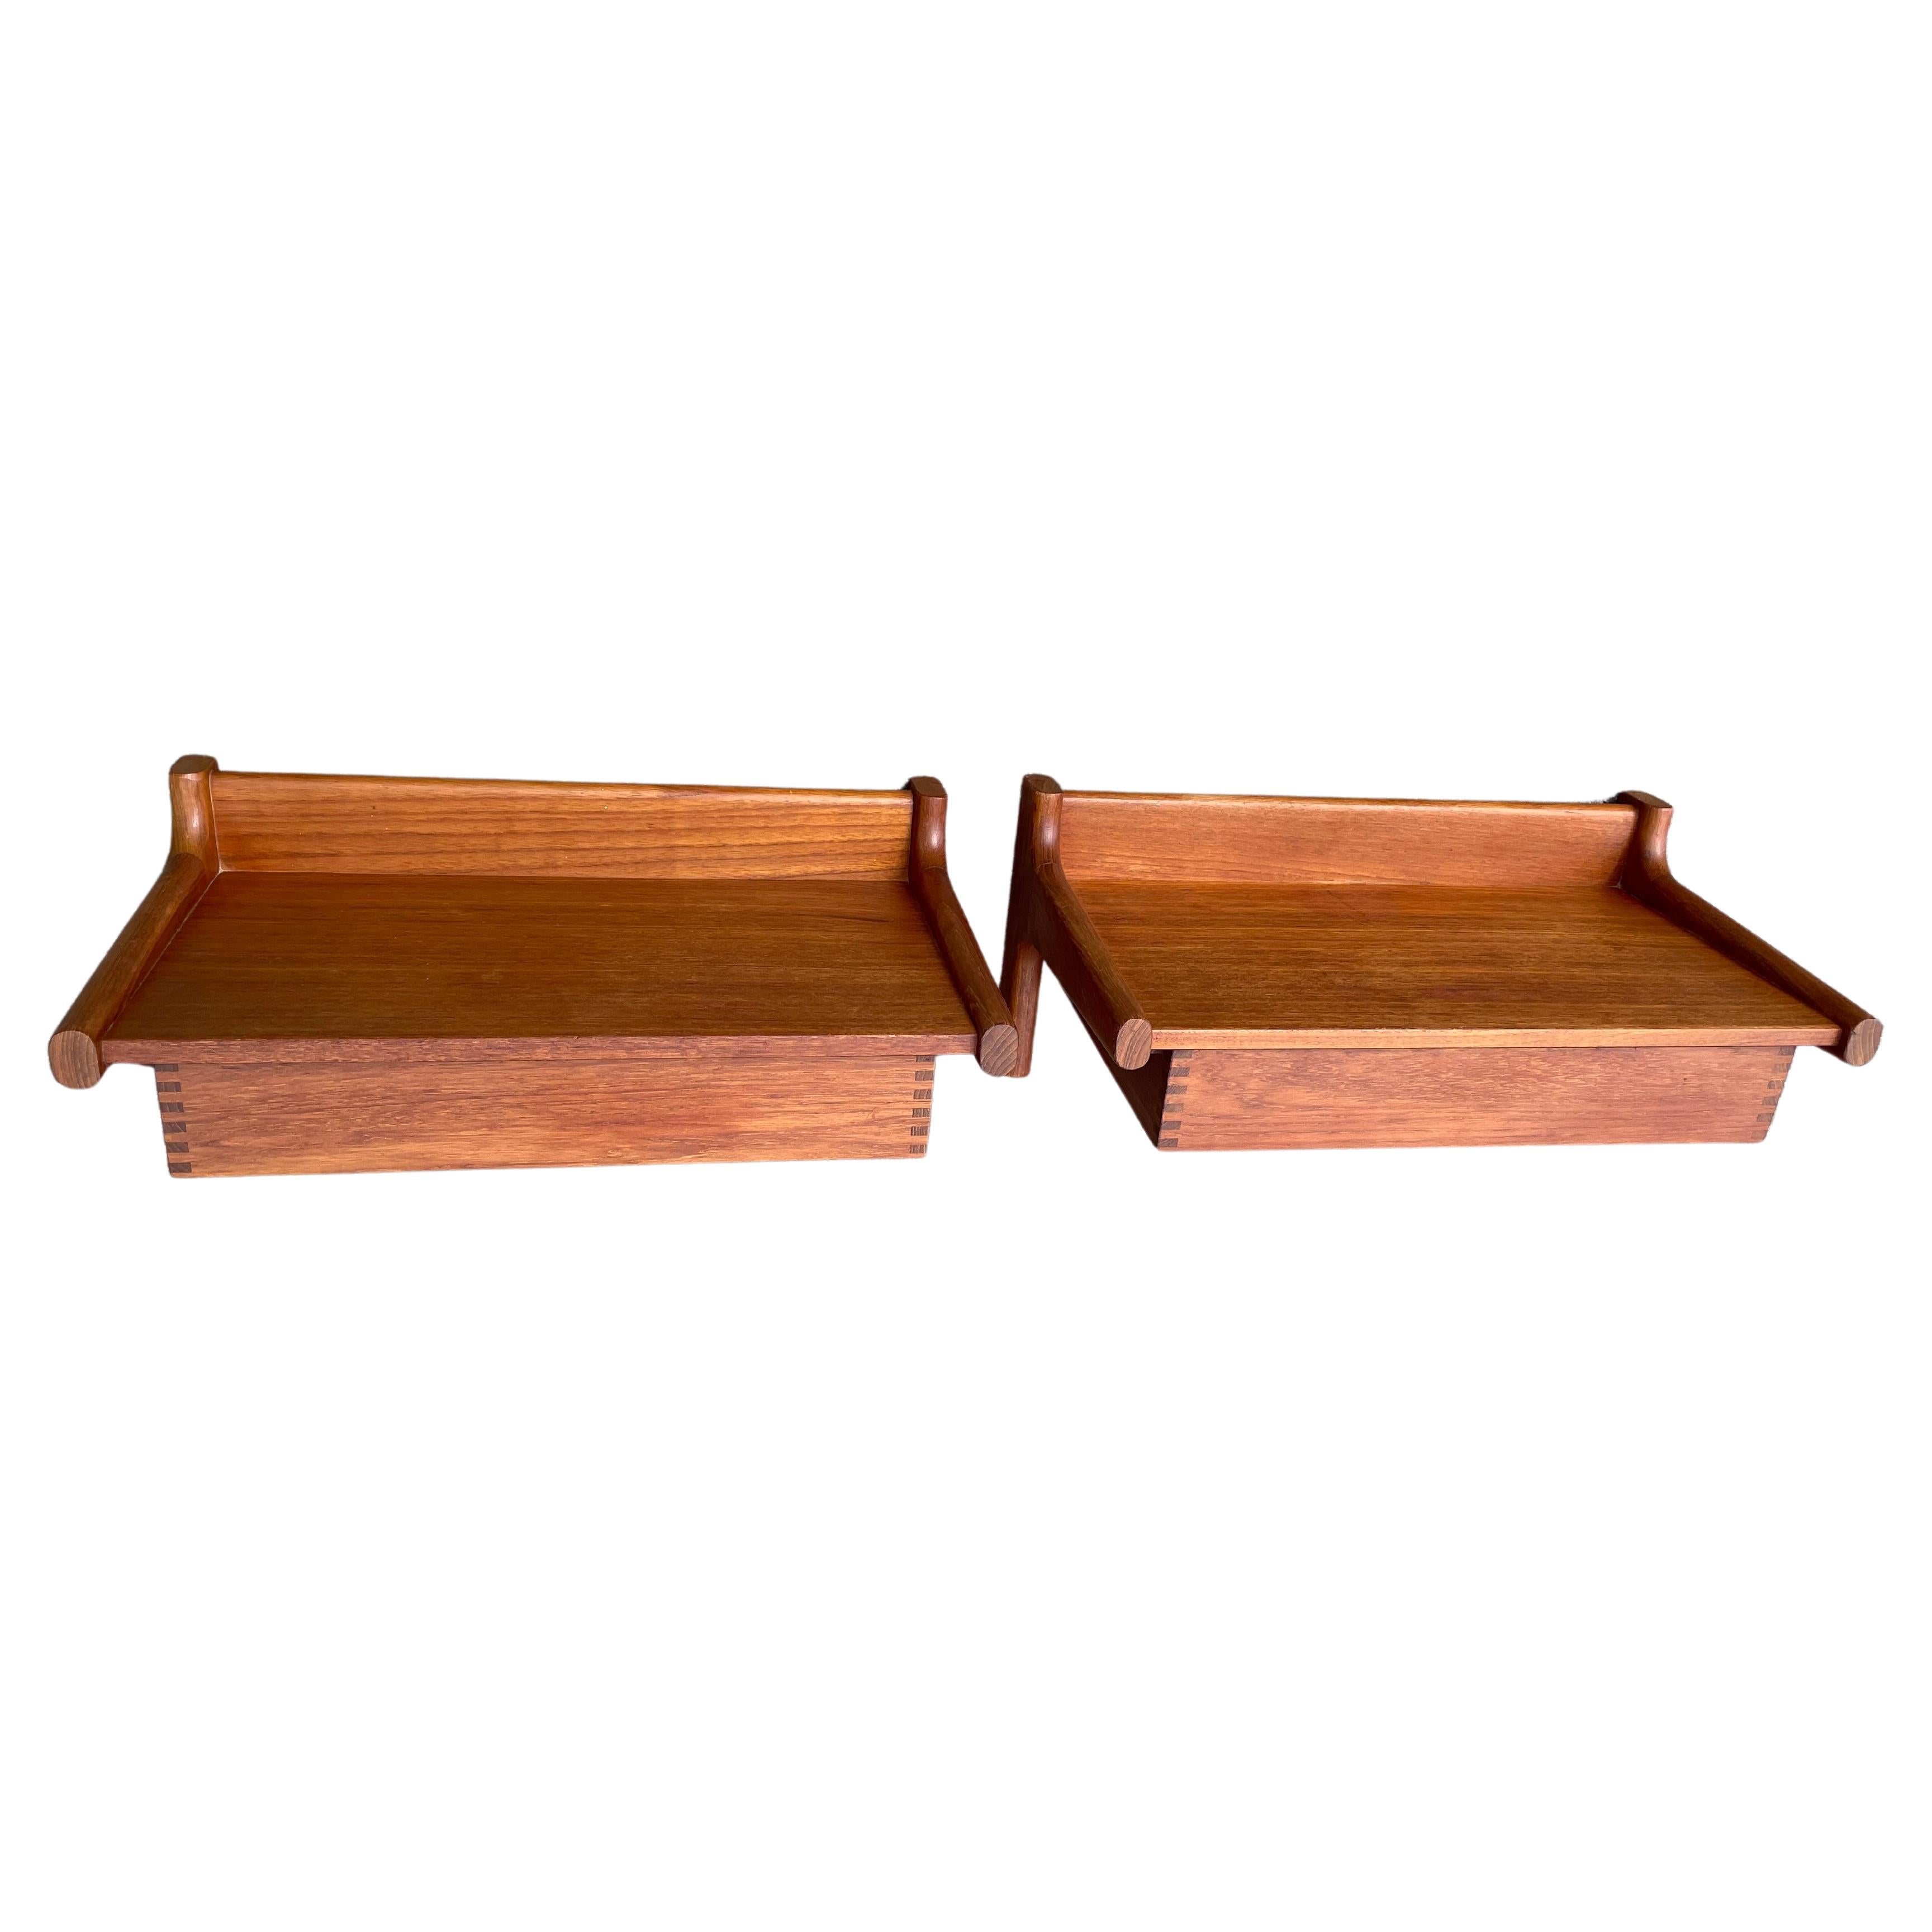 A beautiful set of Kai Kristiansen teak floating nightstands from the 1960´s